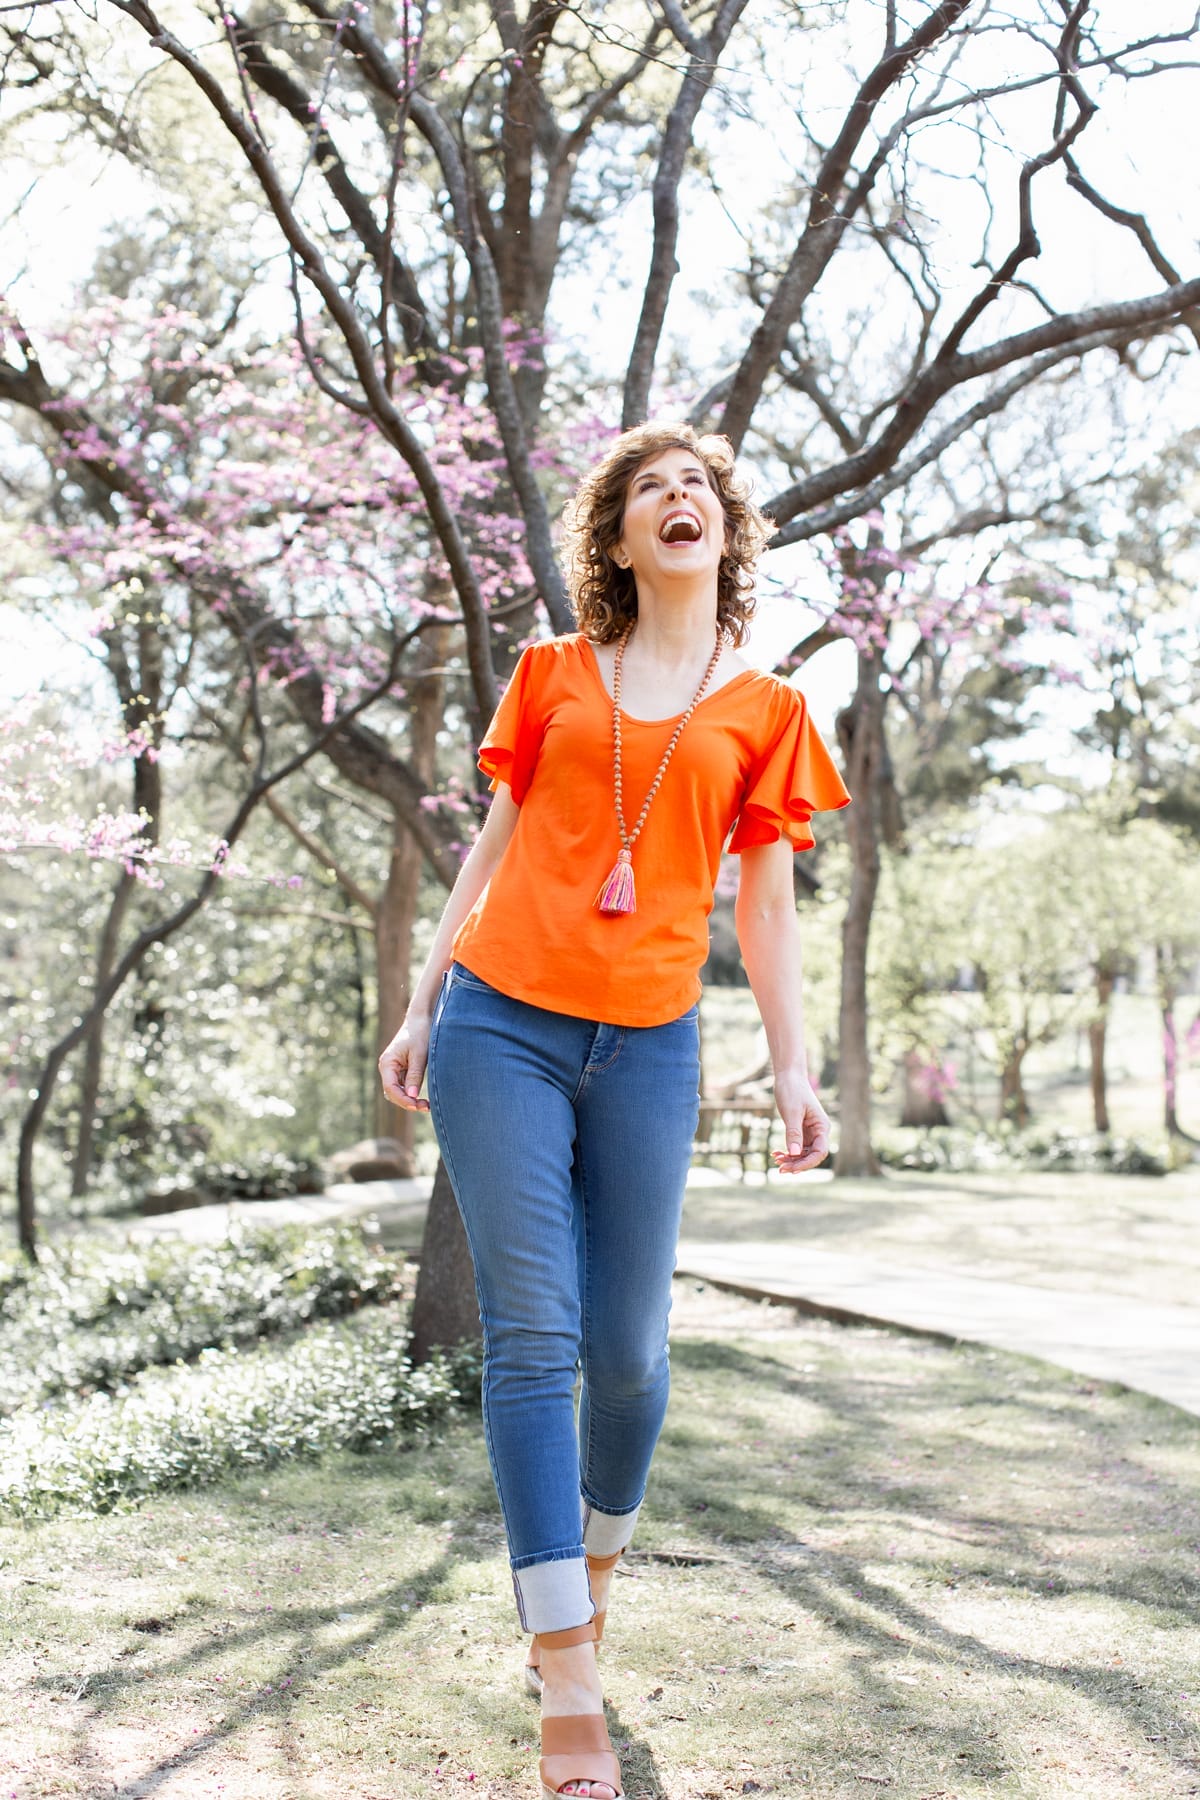 woman in orange shirt and tassel necklace in park